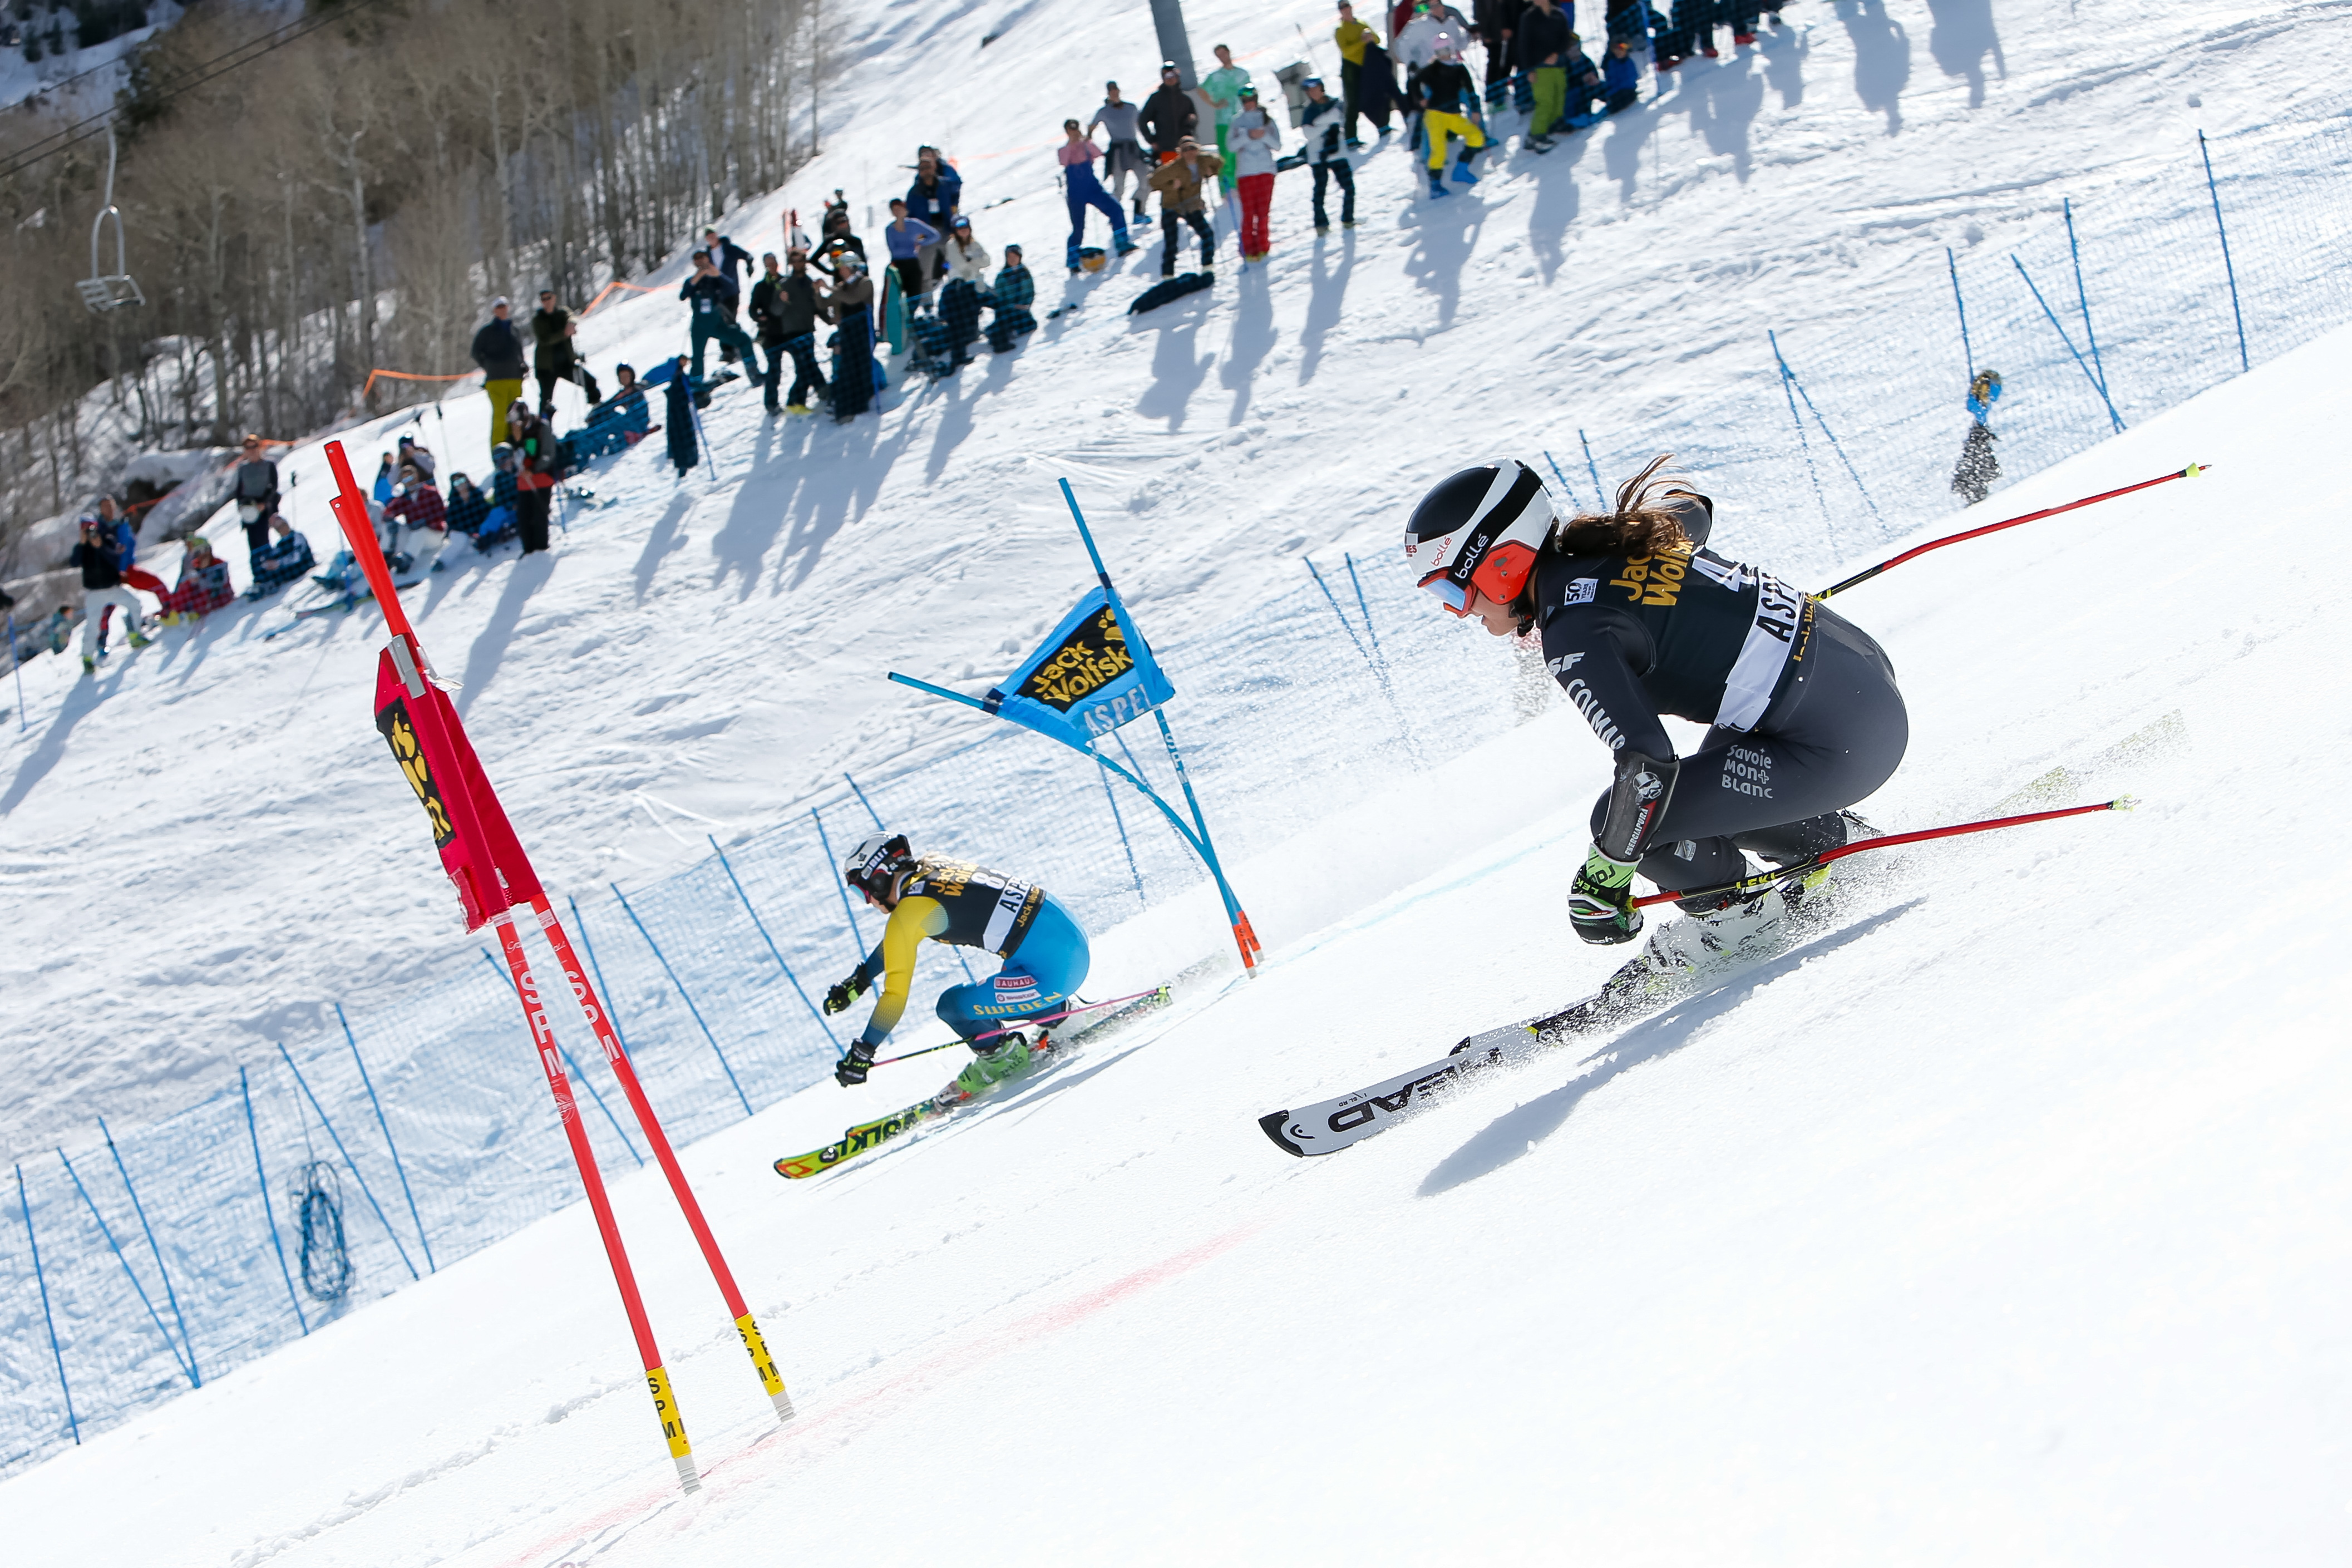 Emelie Wikstroem of Sweden, Coralie Frasse Sombet of France compete during the Audi FIS Alpine Ski World Cup Finals Nation Team Event on March 17, 2017 in Aspen, Colorado. Alexis Boichard/Agence Zoom—Getty Images (Alexis Boichard/Agence Zoom—Getty Images)